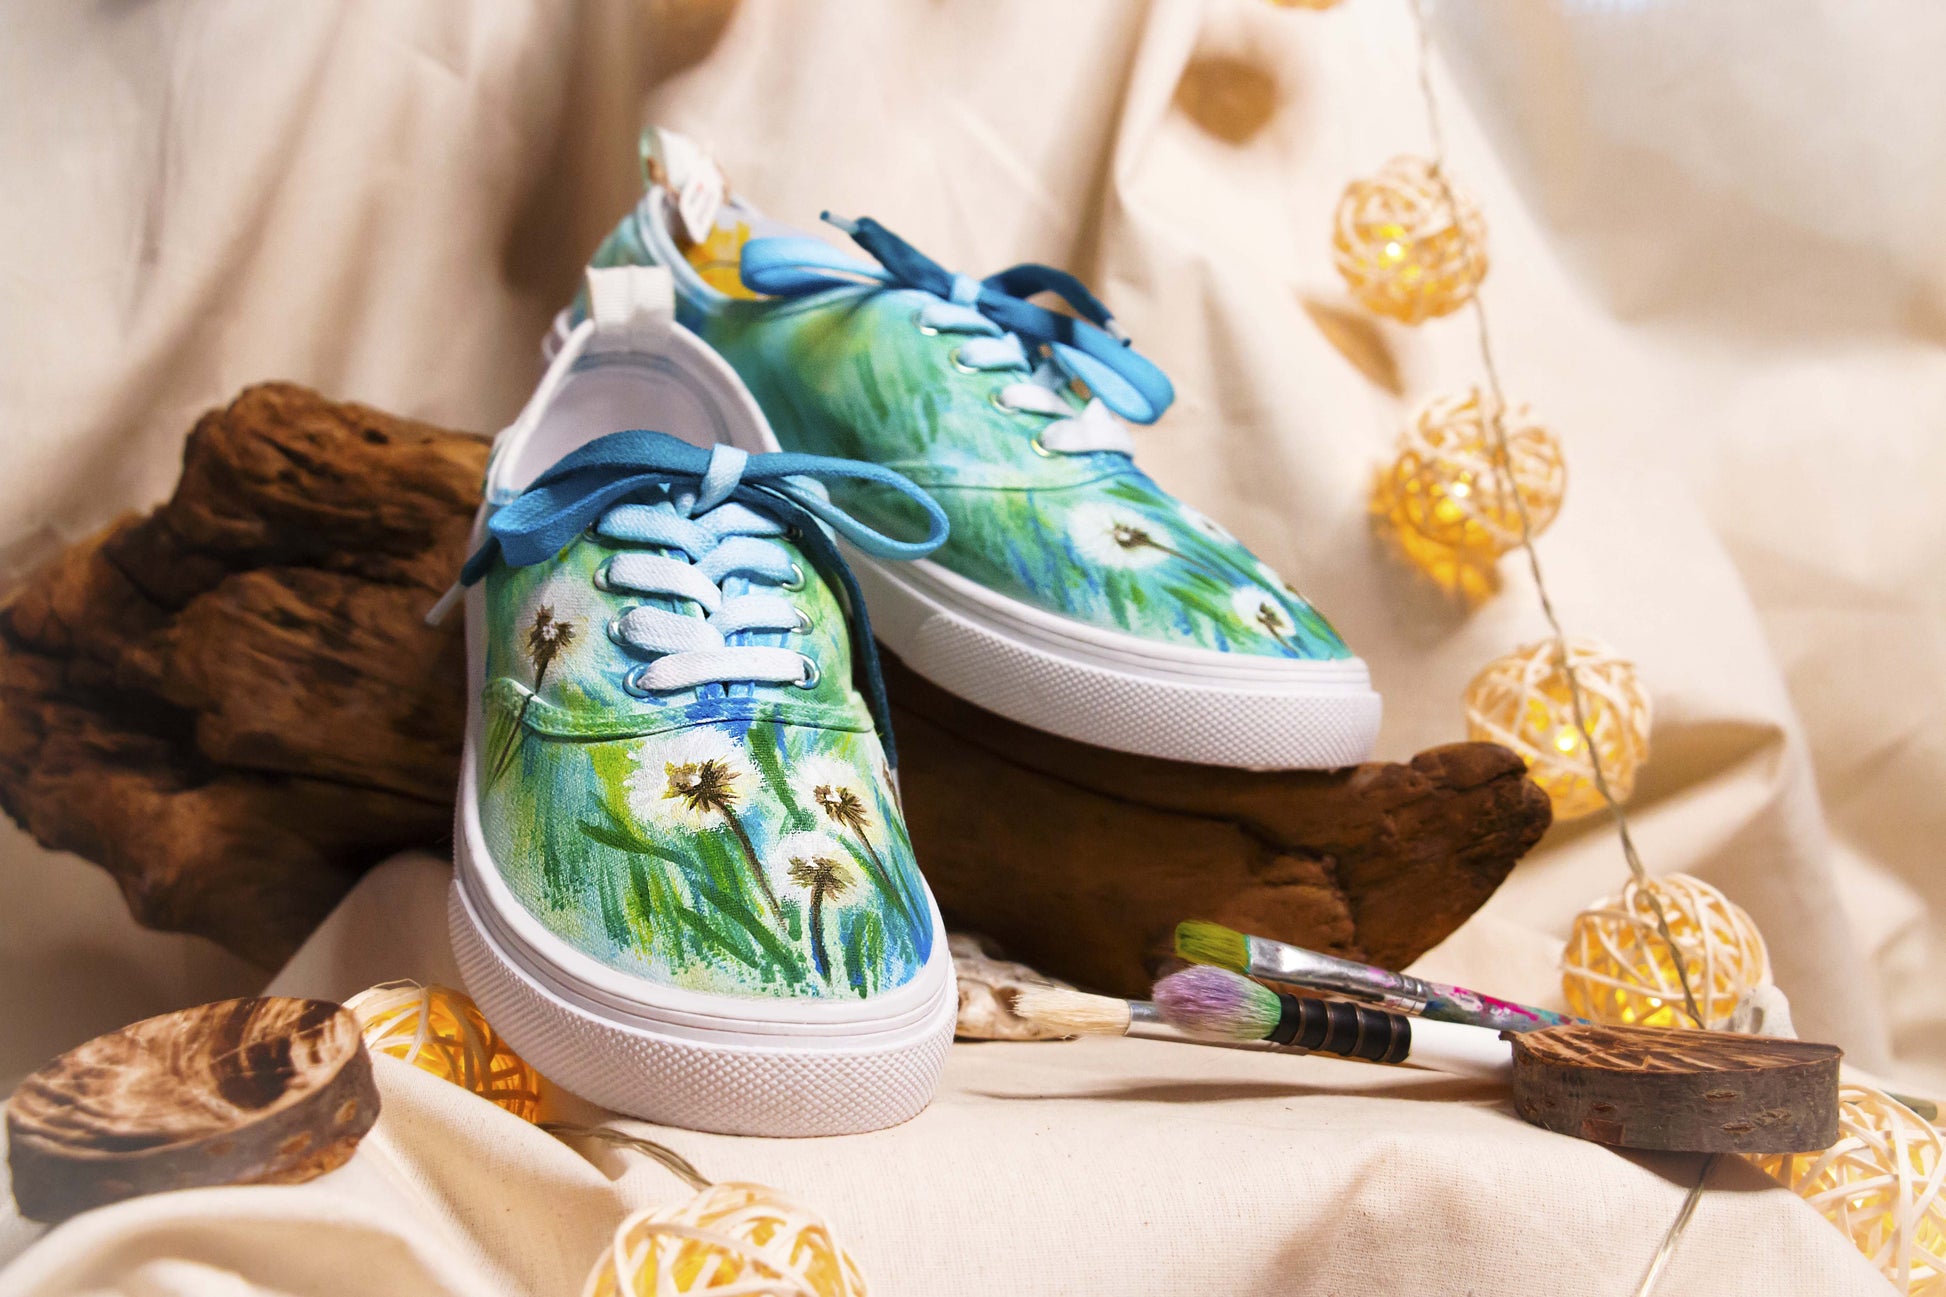 Tenisi Pictati, Painted Sneakers, Pictura Manuala Tenisi, handmade shoes, Everyday shoes, Woman Fashion, customized shoes, Dandelion, Splash paint, Papadie, Papadie pictata, siteseeing painted